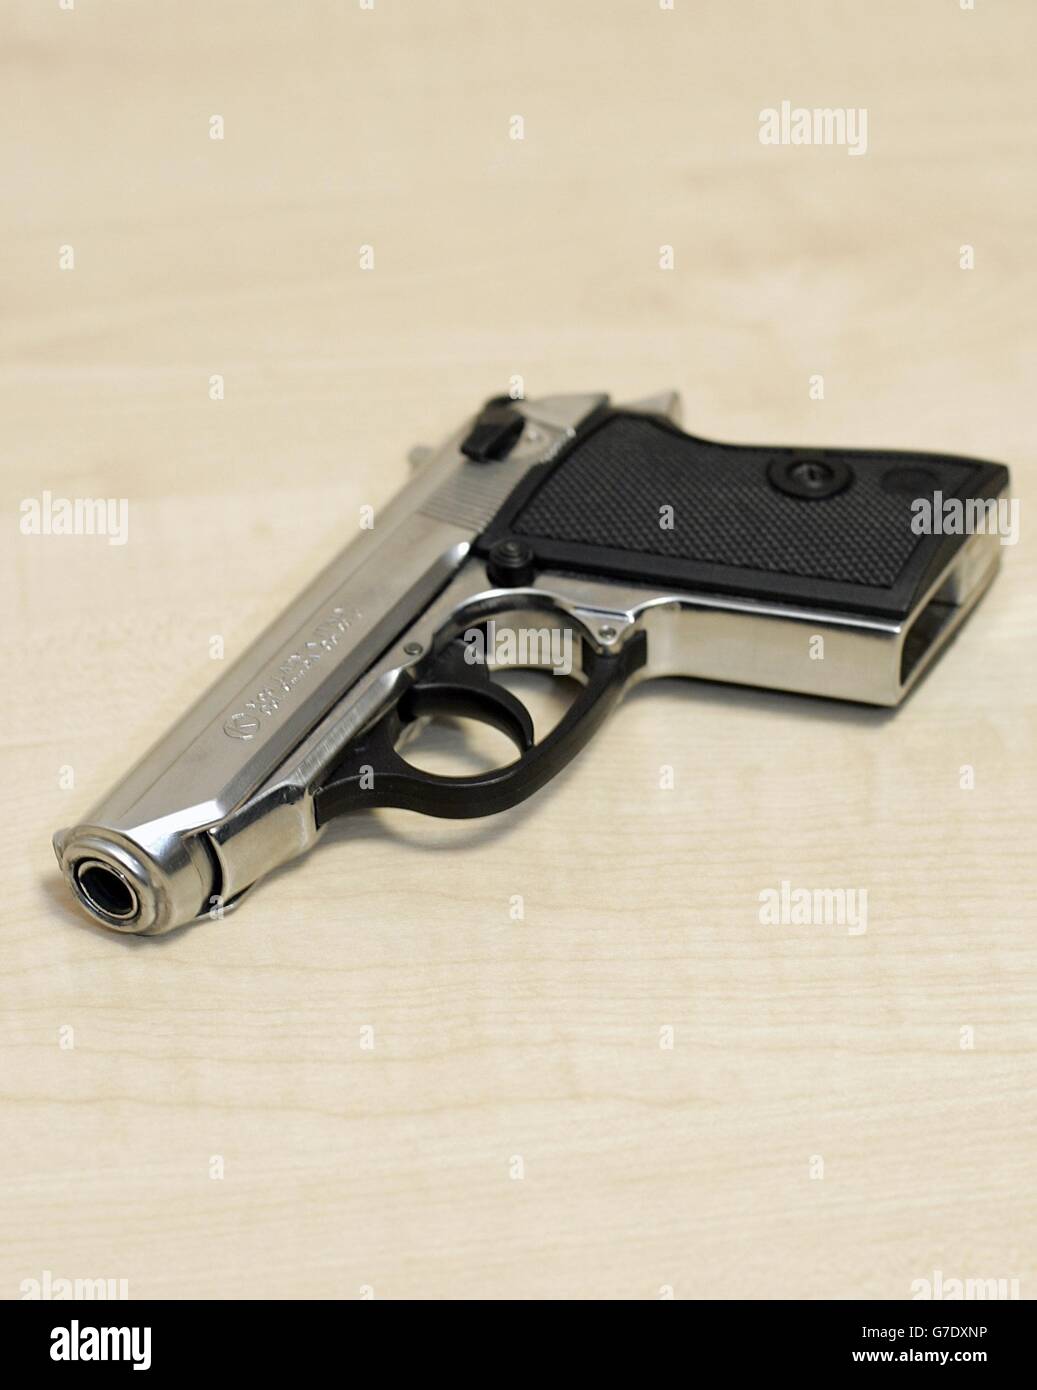 A blank firing hand gun which has been converted to fire live rounds, recovered during a police anti drug and fire arm operation 'Vezere' in Lewisham Way, Lewisham. Stock Photo